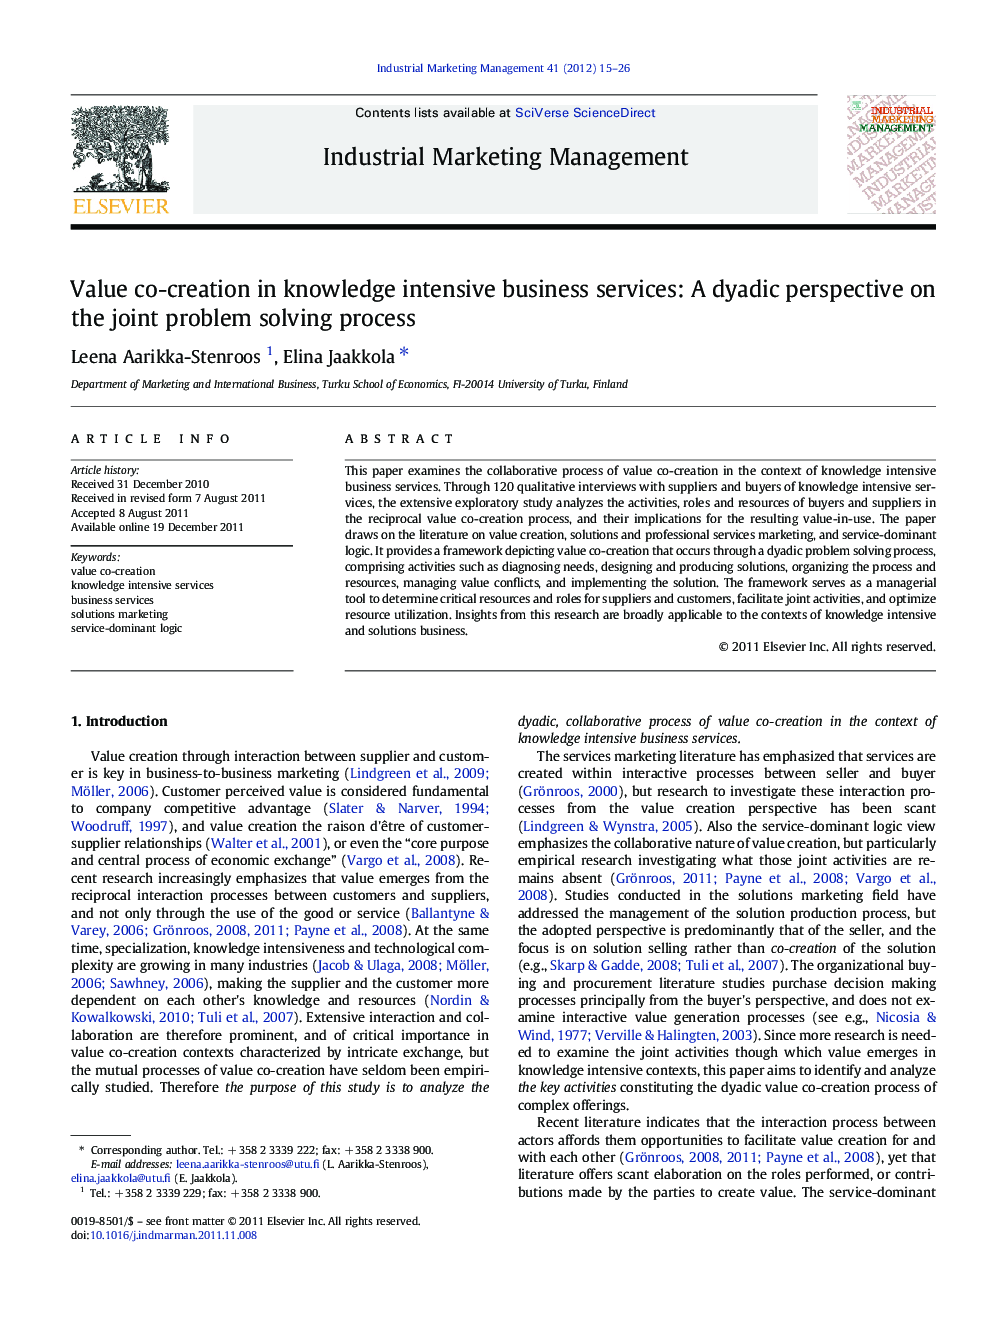 Value co-creation in knowledge intensive business services: A dyadic perspective on the joint problem solving process